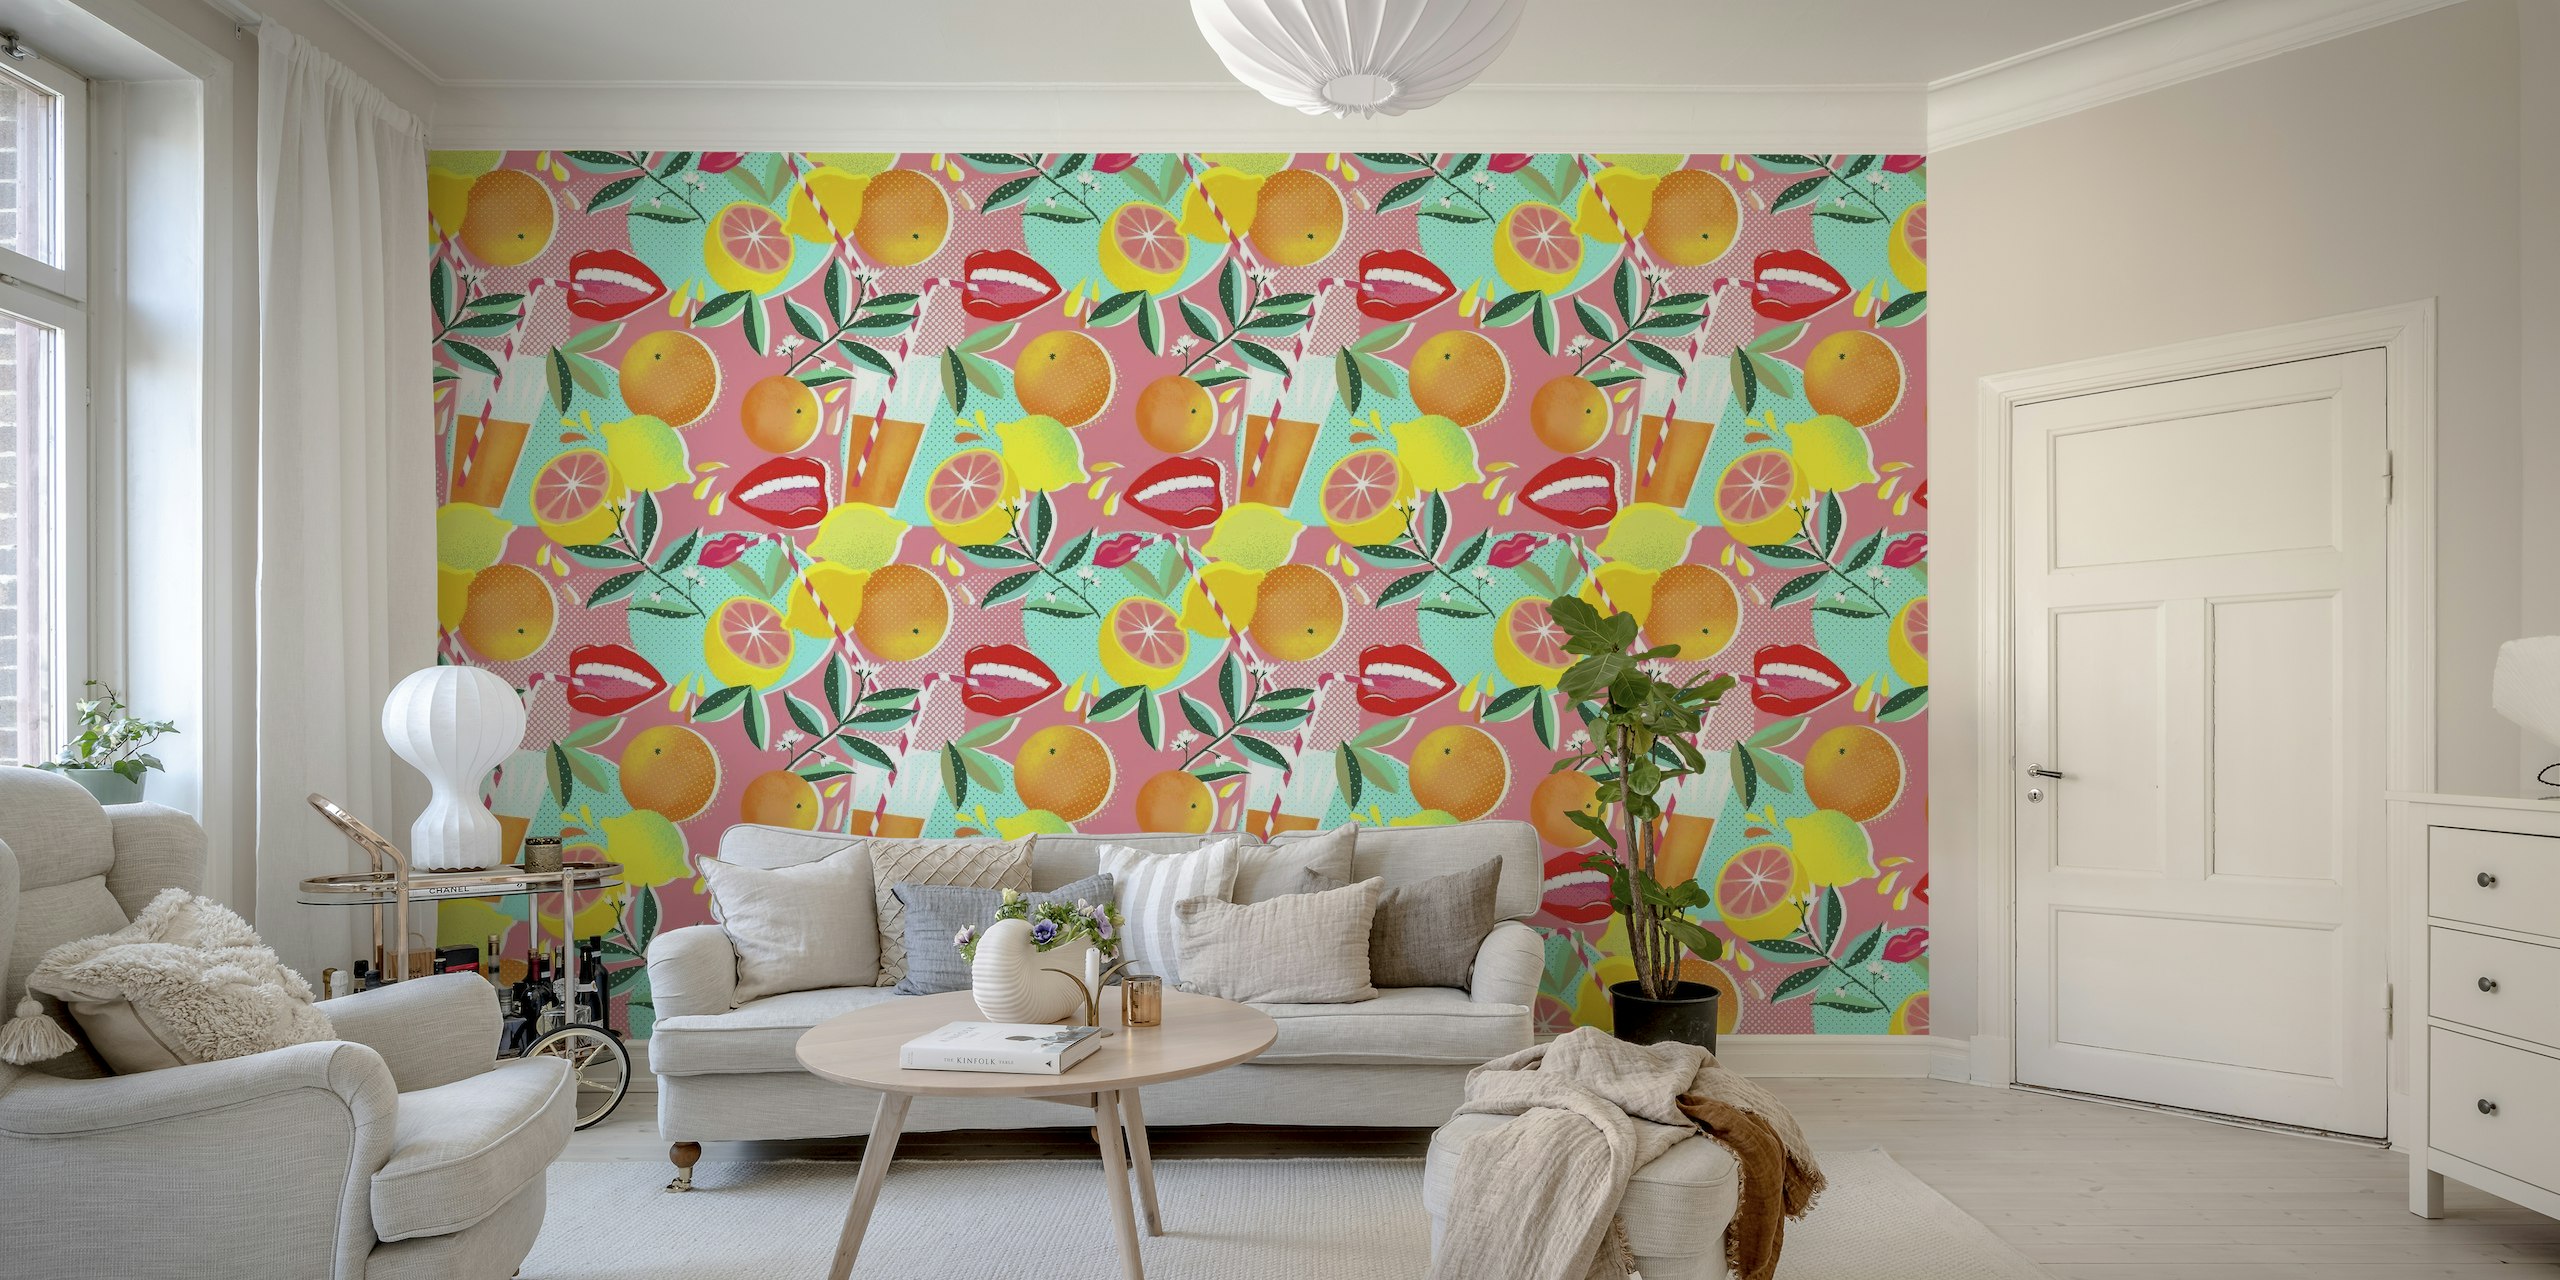 Vibrant 'Citrus Pop Pink' wall mural featuring pink background with citrus fruits and playful patterns